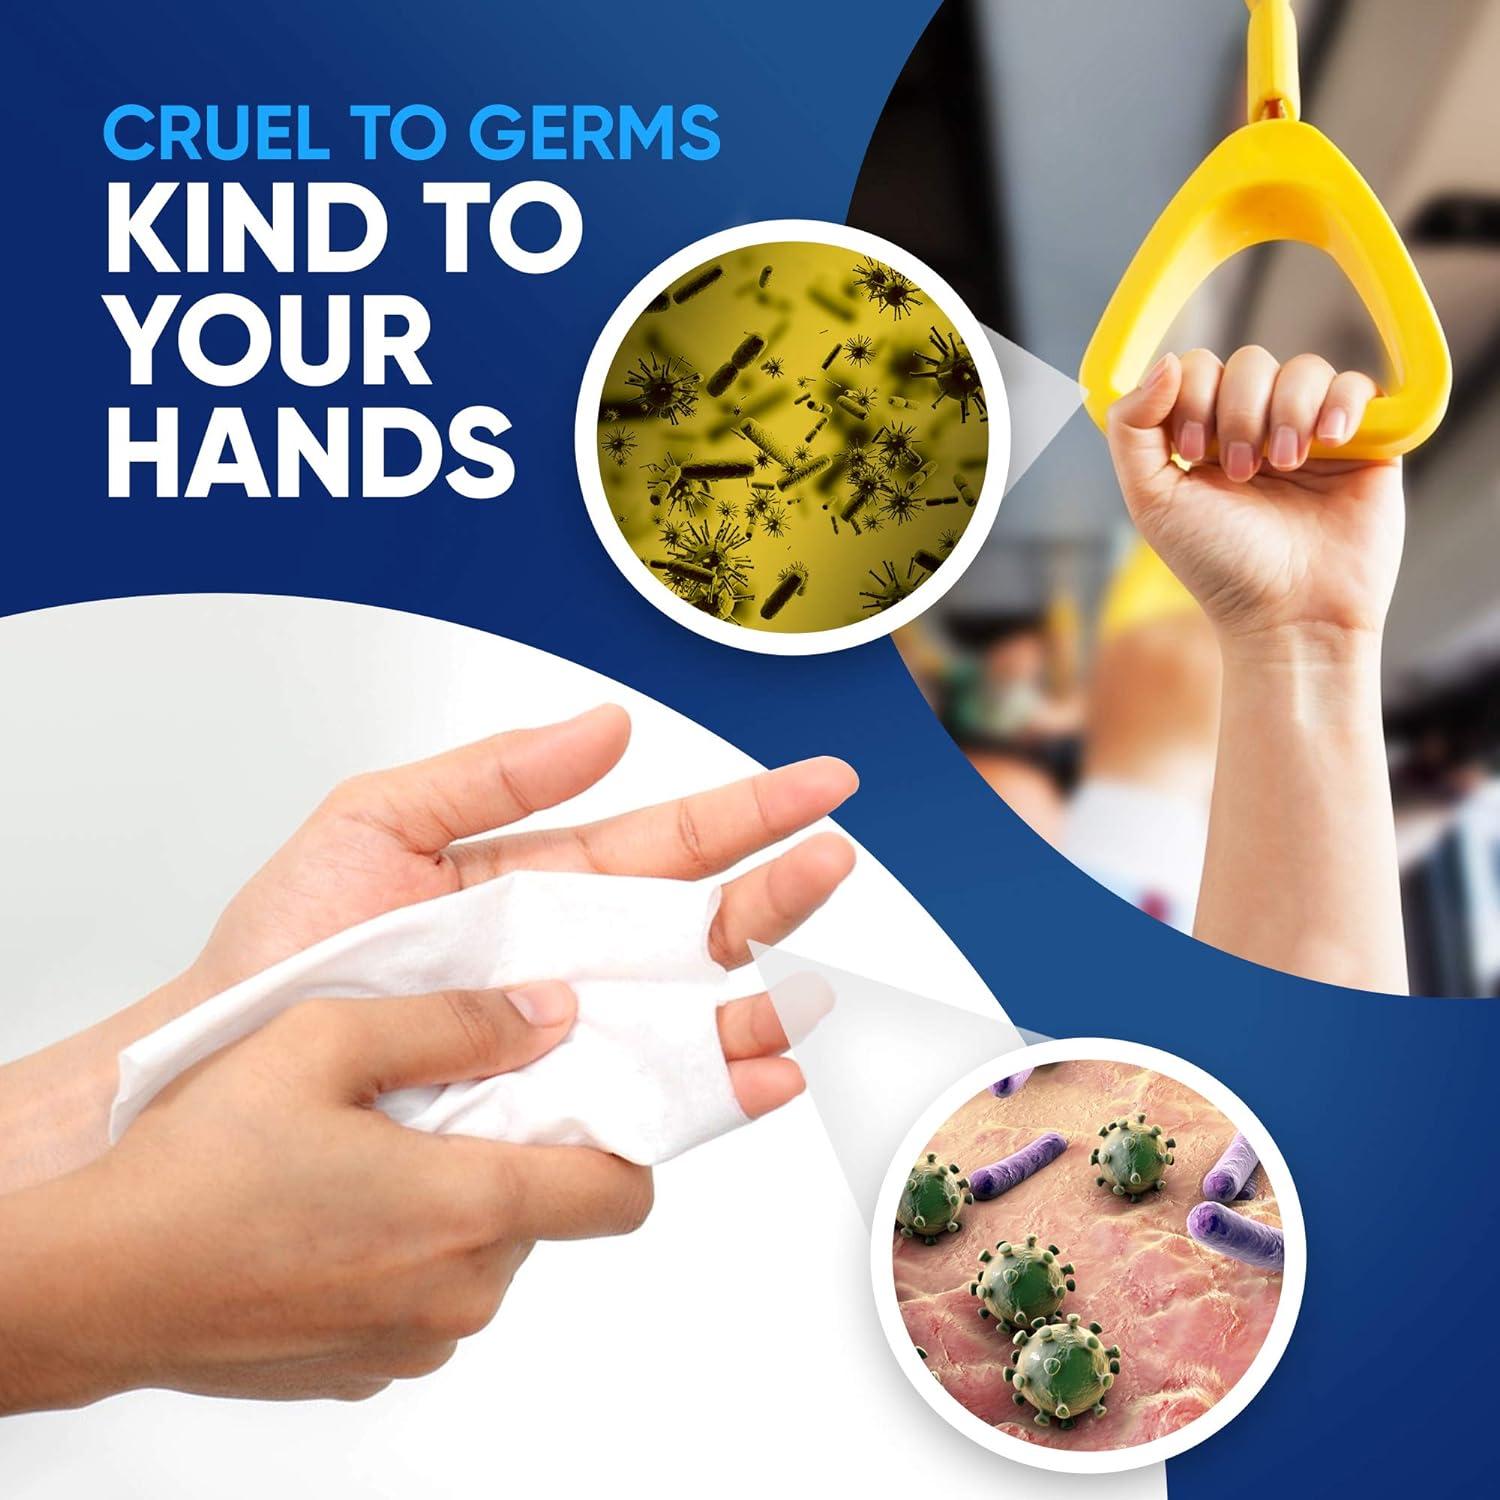 Hand Sanitizing Wipes - Kills 99.9% of Germs